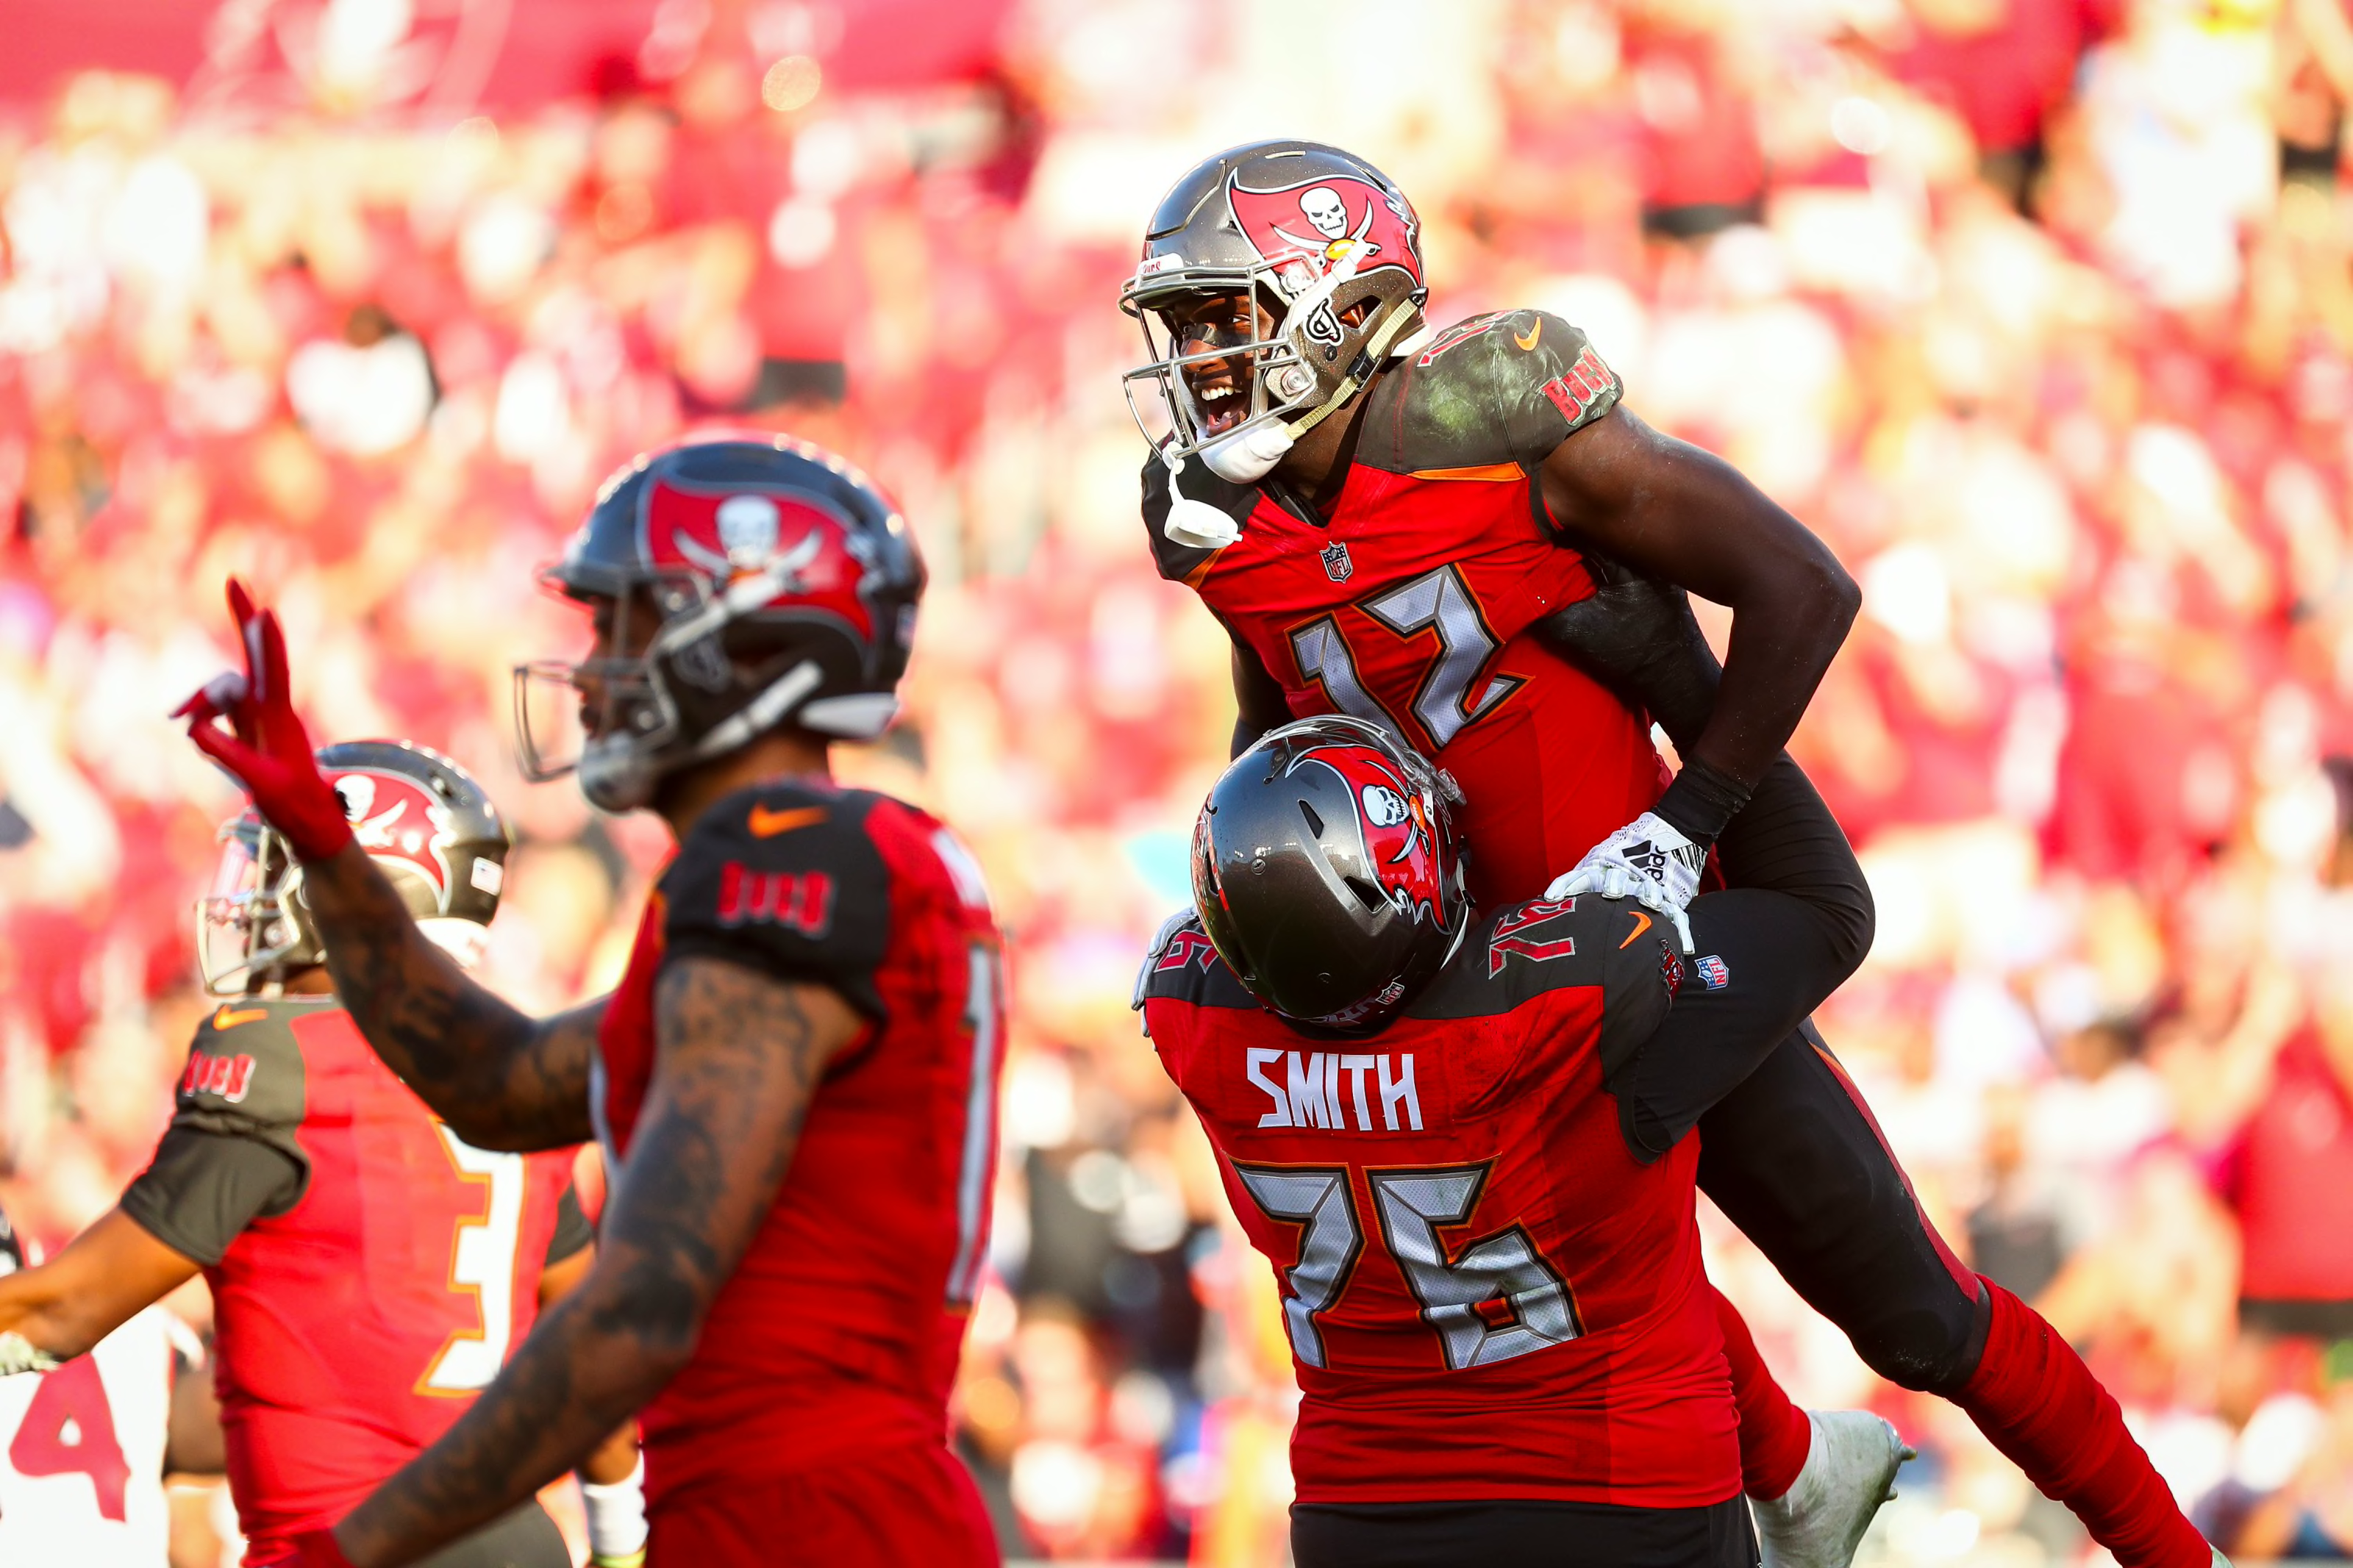 Potential tradeup targets for the Tampa Bay Buccaneers in 2020 NFL Draft